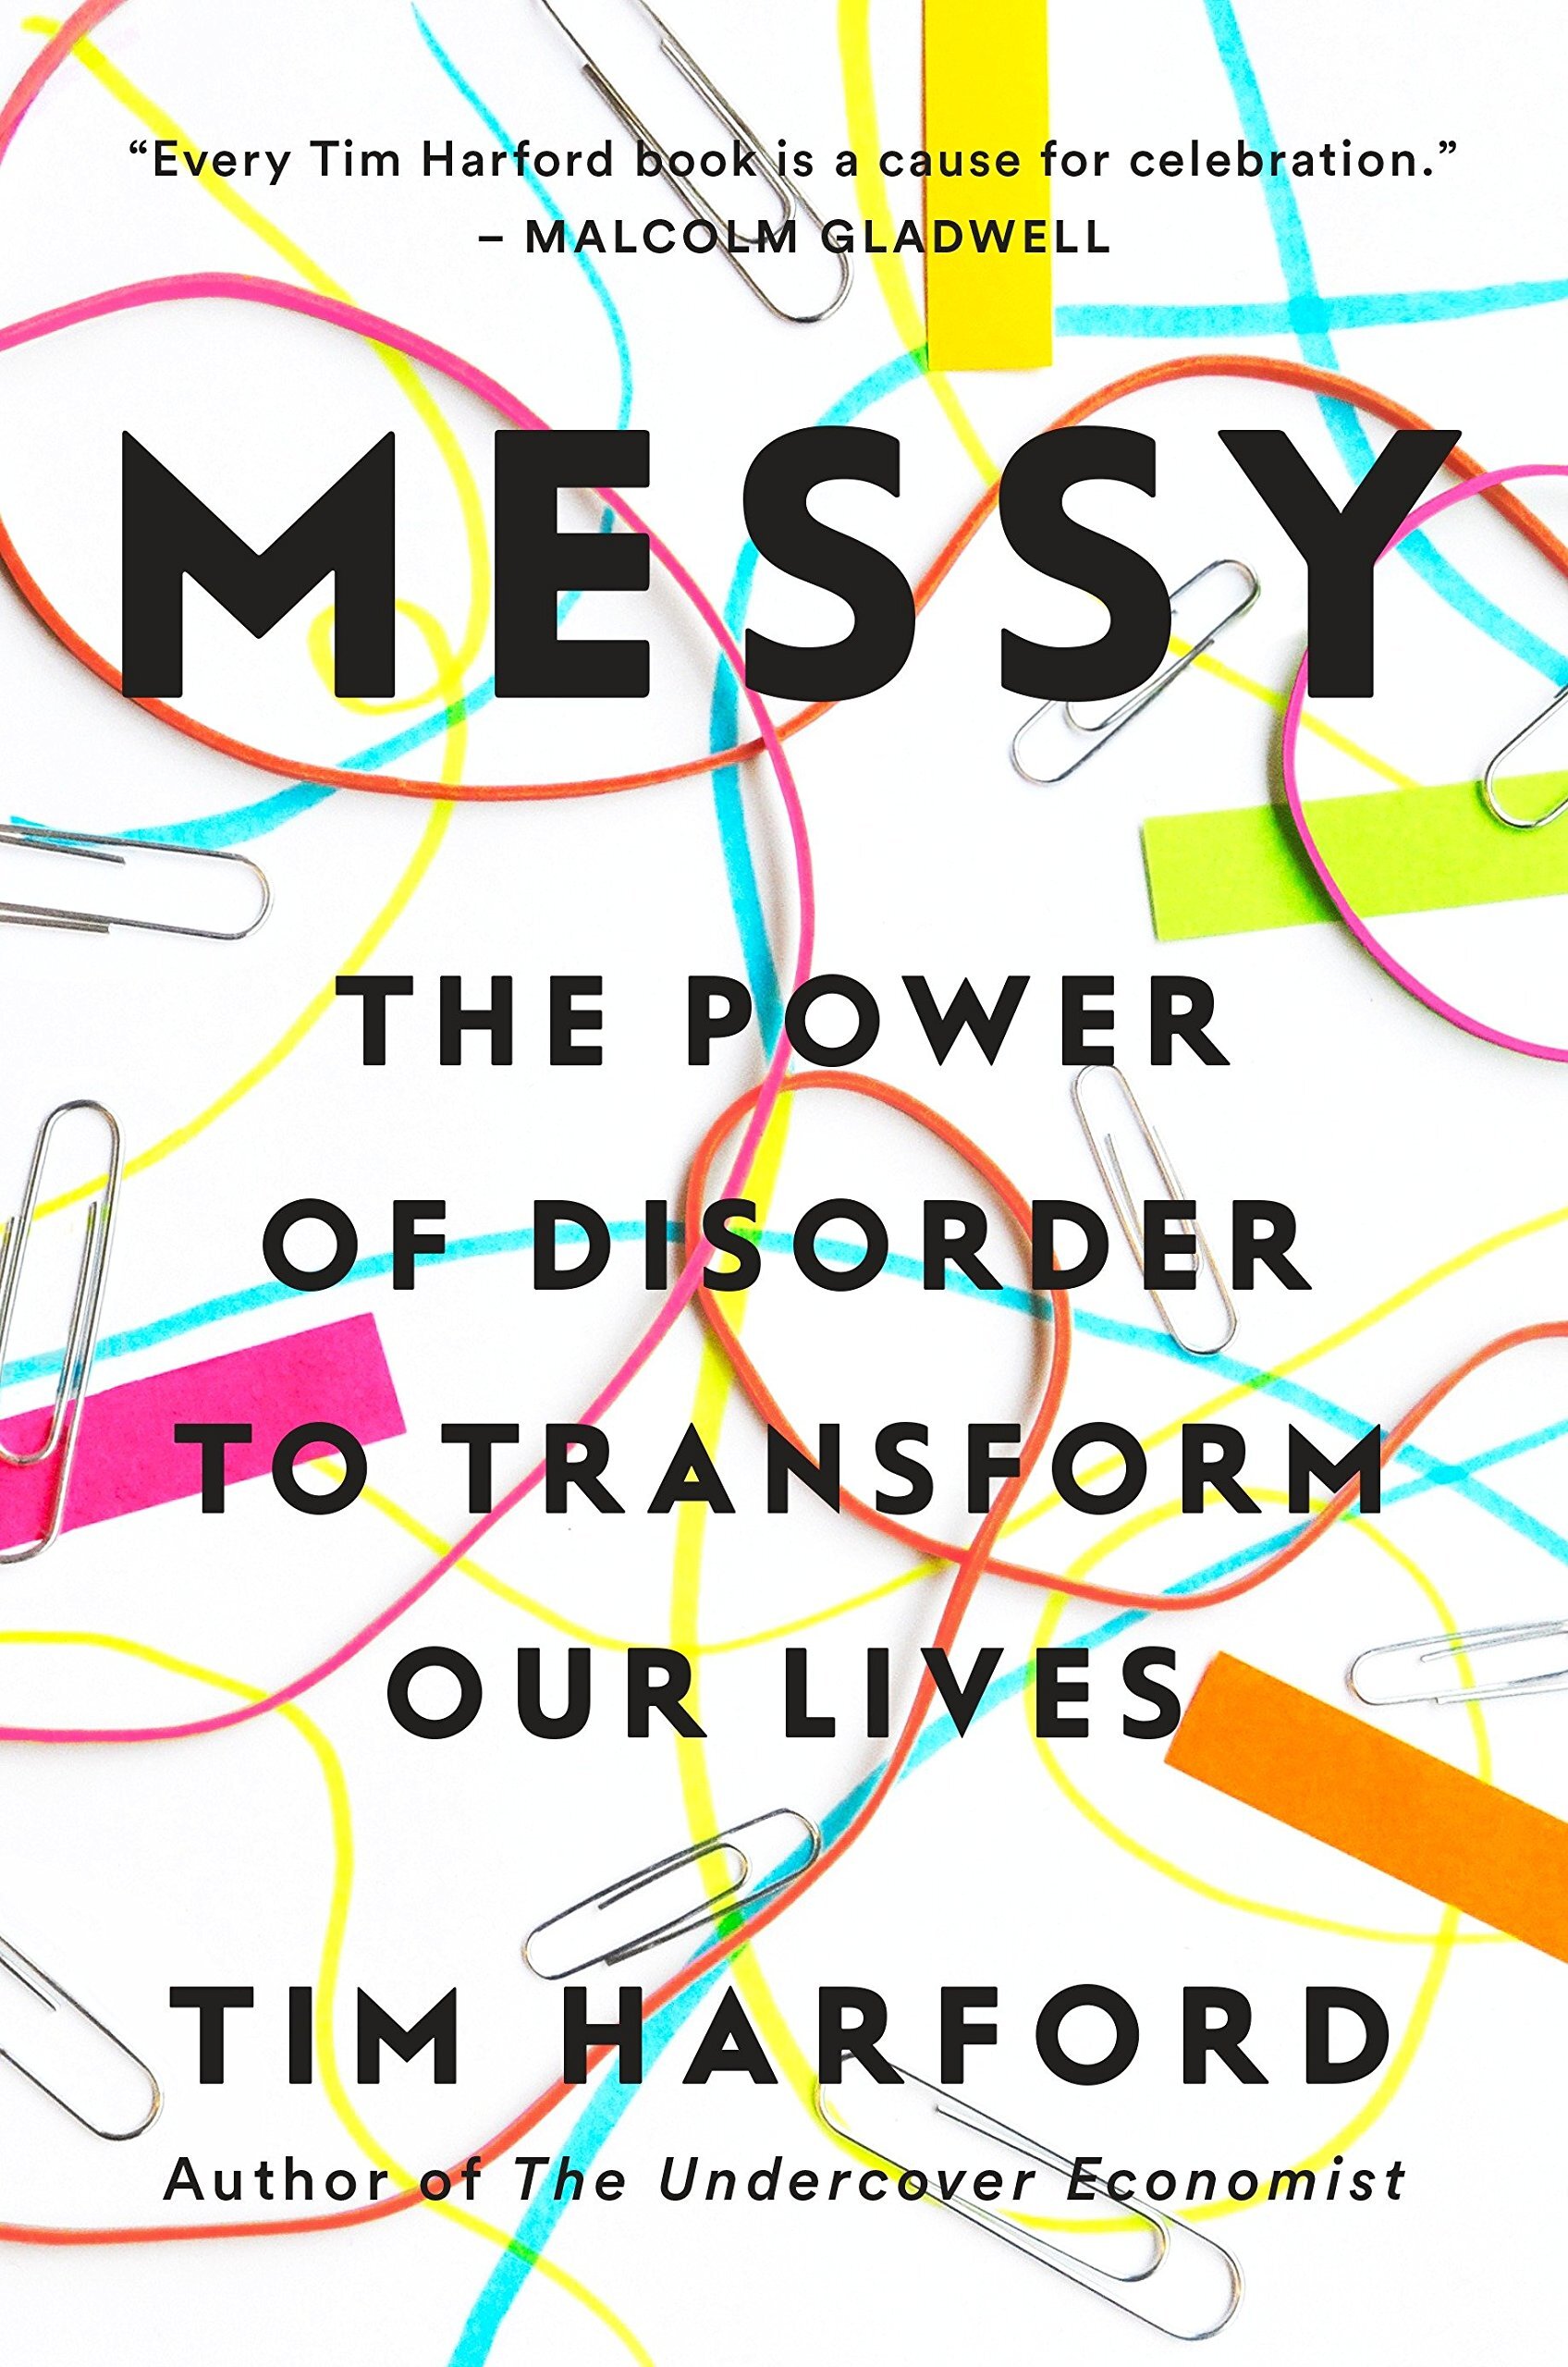  Extensively referenced in Messy: The Power of Disorder to Transform Our Lives.  